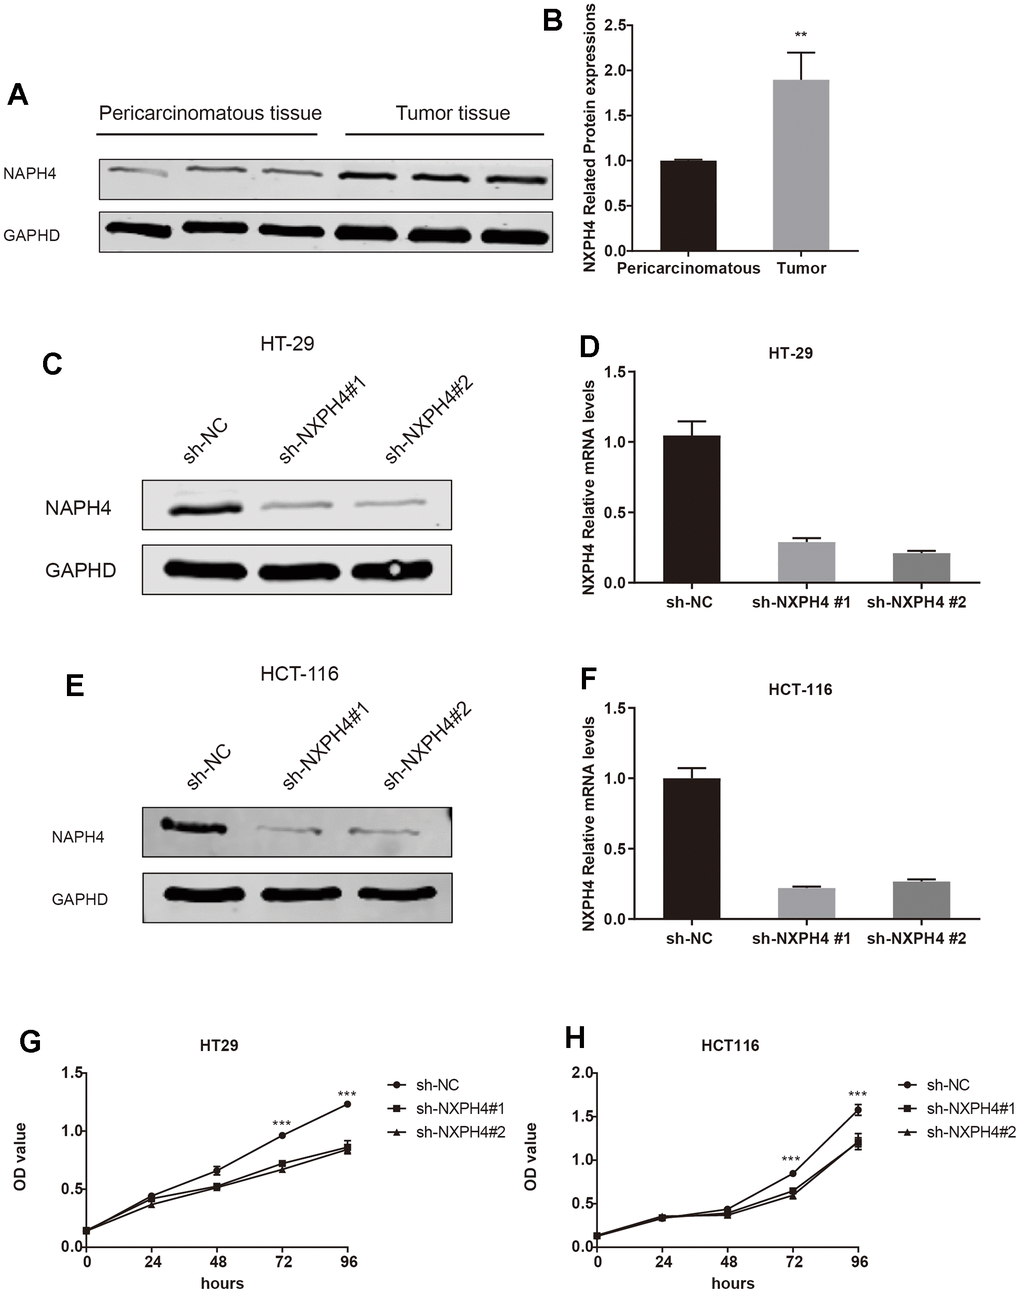 The expression of NXPH4 in colon cancer tissues was verified and knocked down in cell lines. (A, B) Western blot was used to verify the expression of NXPH4 at the protein level in colon cancer and para-cancer tissues. (C) NXPH4 was knocked down in HT-29 cell line and verified by Western blot. (D) NXPH4 was knocked down in HT-29 cell line and verified by qPCR. (E) NXPH4 was knocked down in HCT-116 cell line and verified by Western blot. (F) NXPH4 was knocked down in HCT-116 cell line and verified by qPCR. (G) CCK8 assay of control HT-29 cell line and HT-29 cell line with NXPH4 knockdown. (H) CCK8 assay for control HCT-116 cell line and HCT-116 cell line with NXPH4 knockdown.